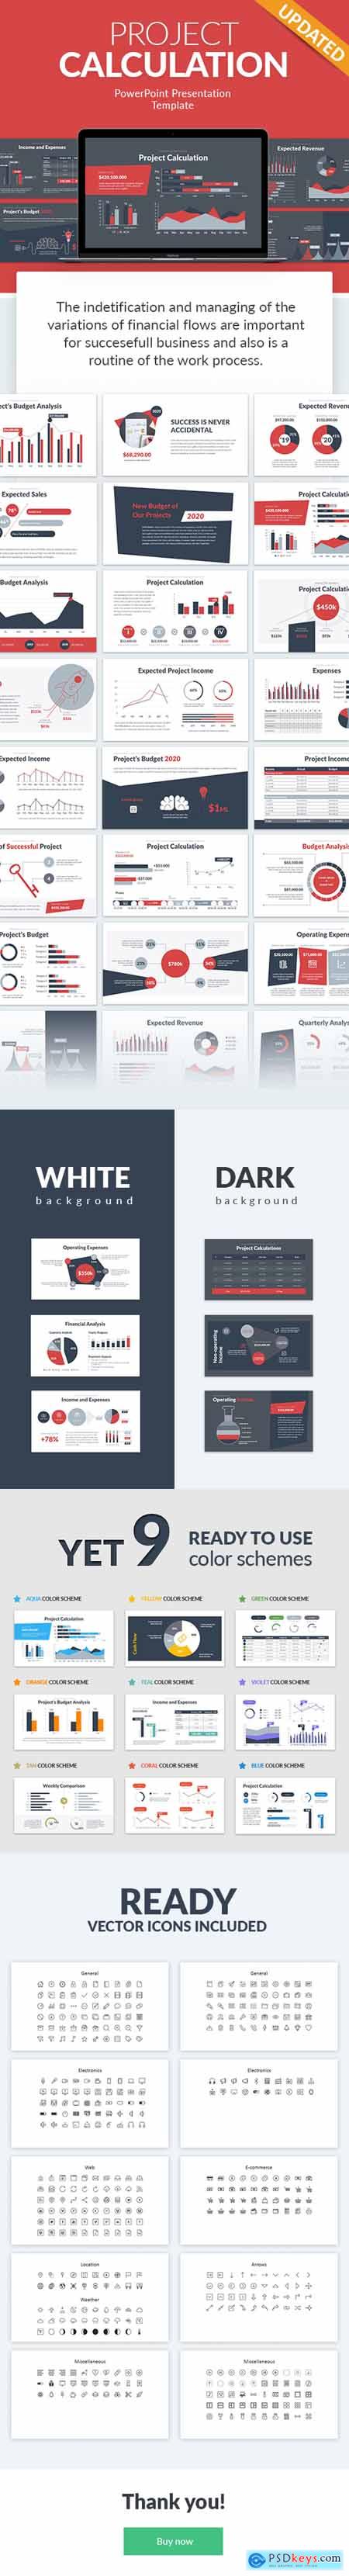 Project Calculation PowerPoint Presentation Template 25276210